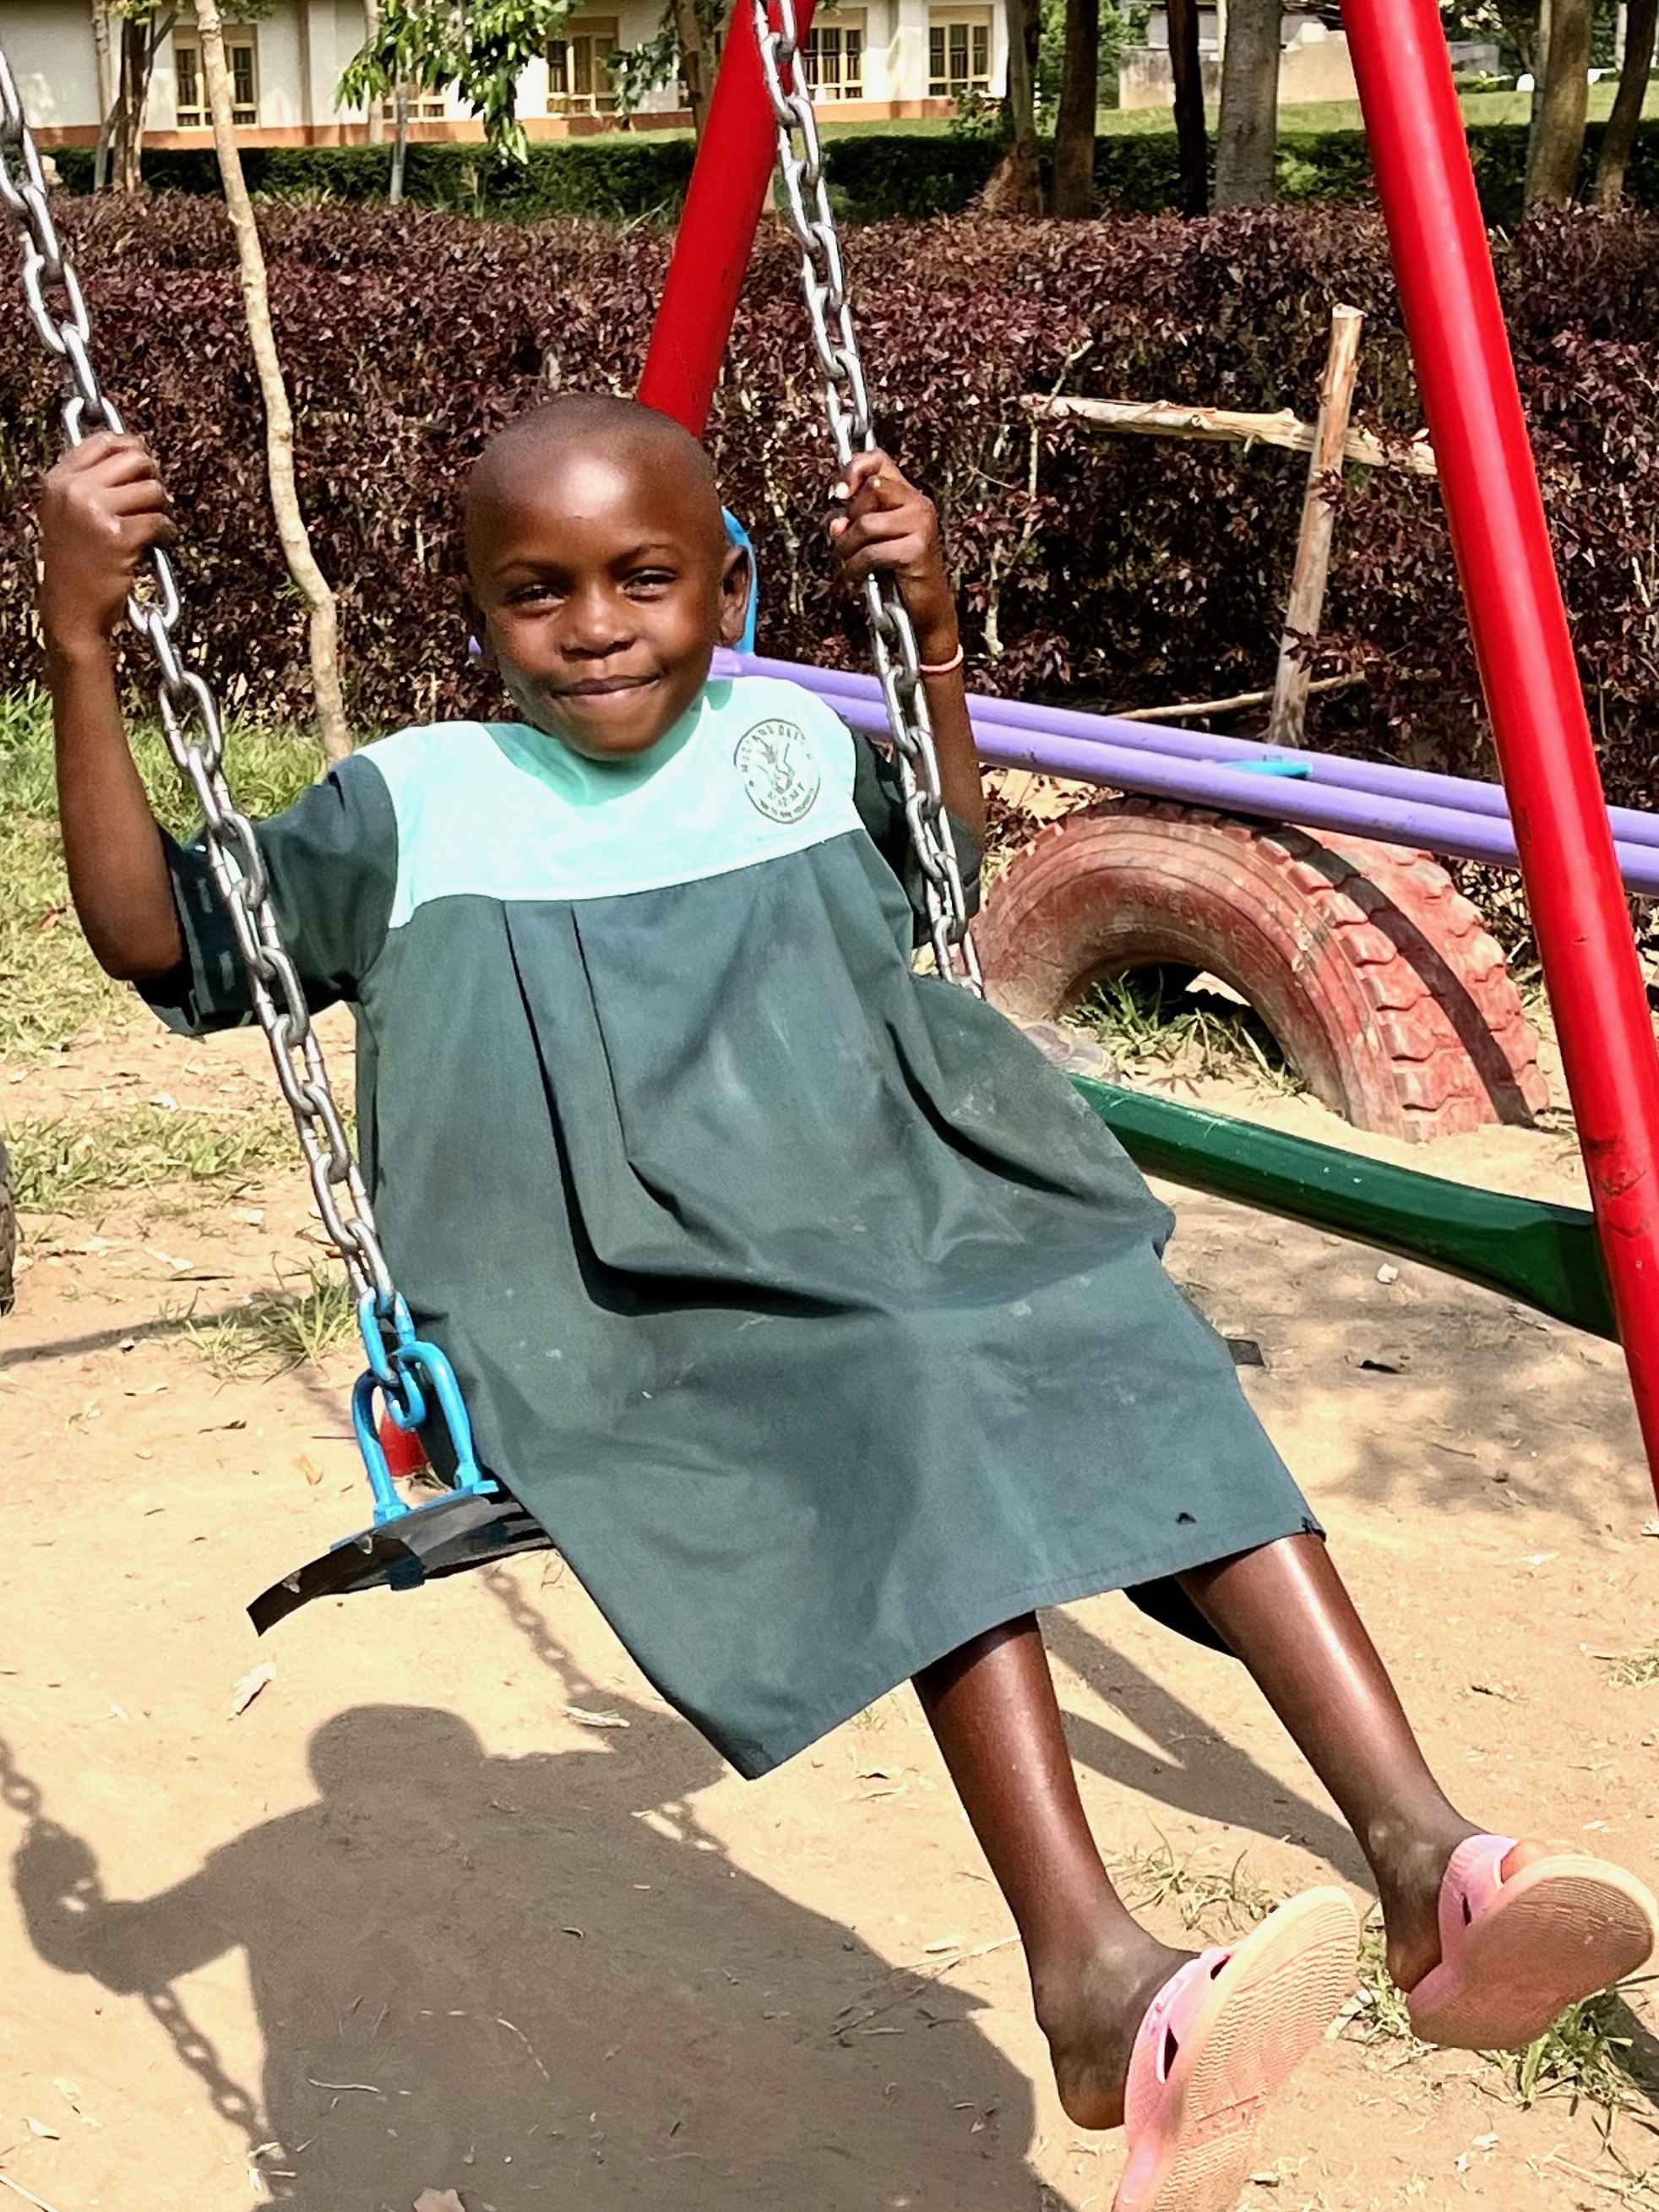 a young child swinging on a playground swing set, smiling brightly at the camera. The child is wearing a green school uniform and pink sandals. The swing set has red metal poles, and there are various other playground items visible in the background